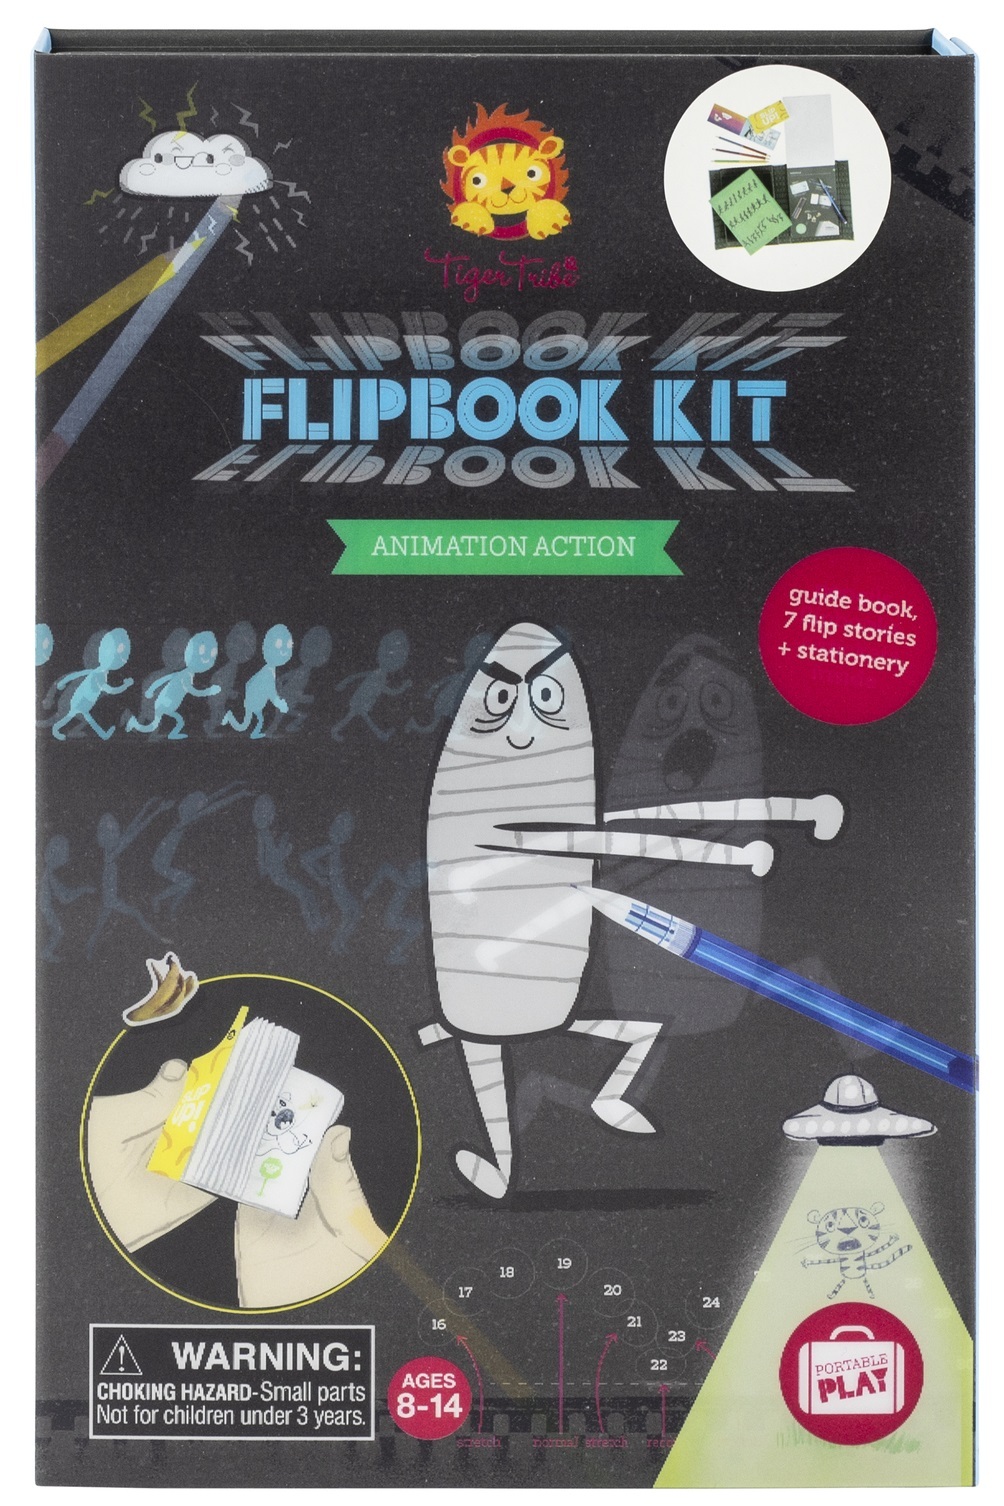 Buy Tiger Tribe - Flipbook Kit - Animation Action